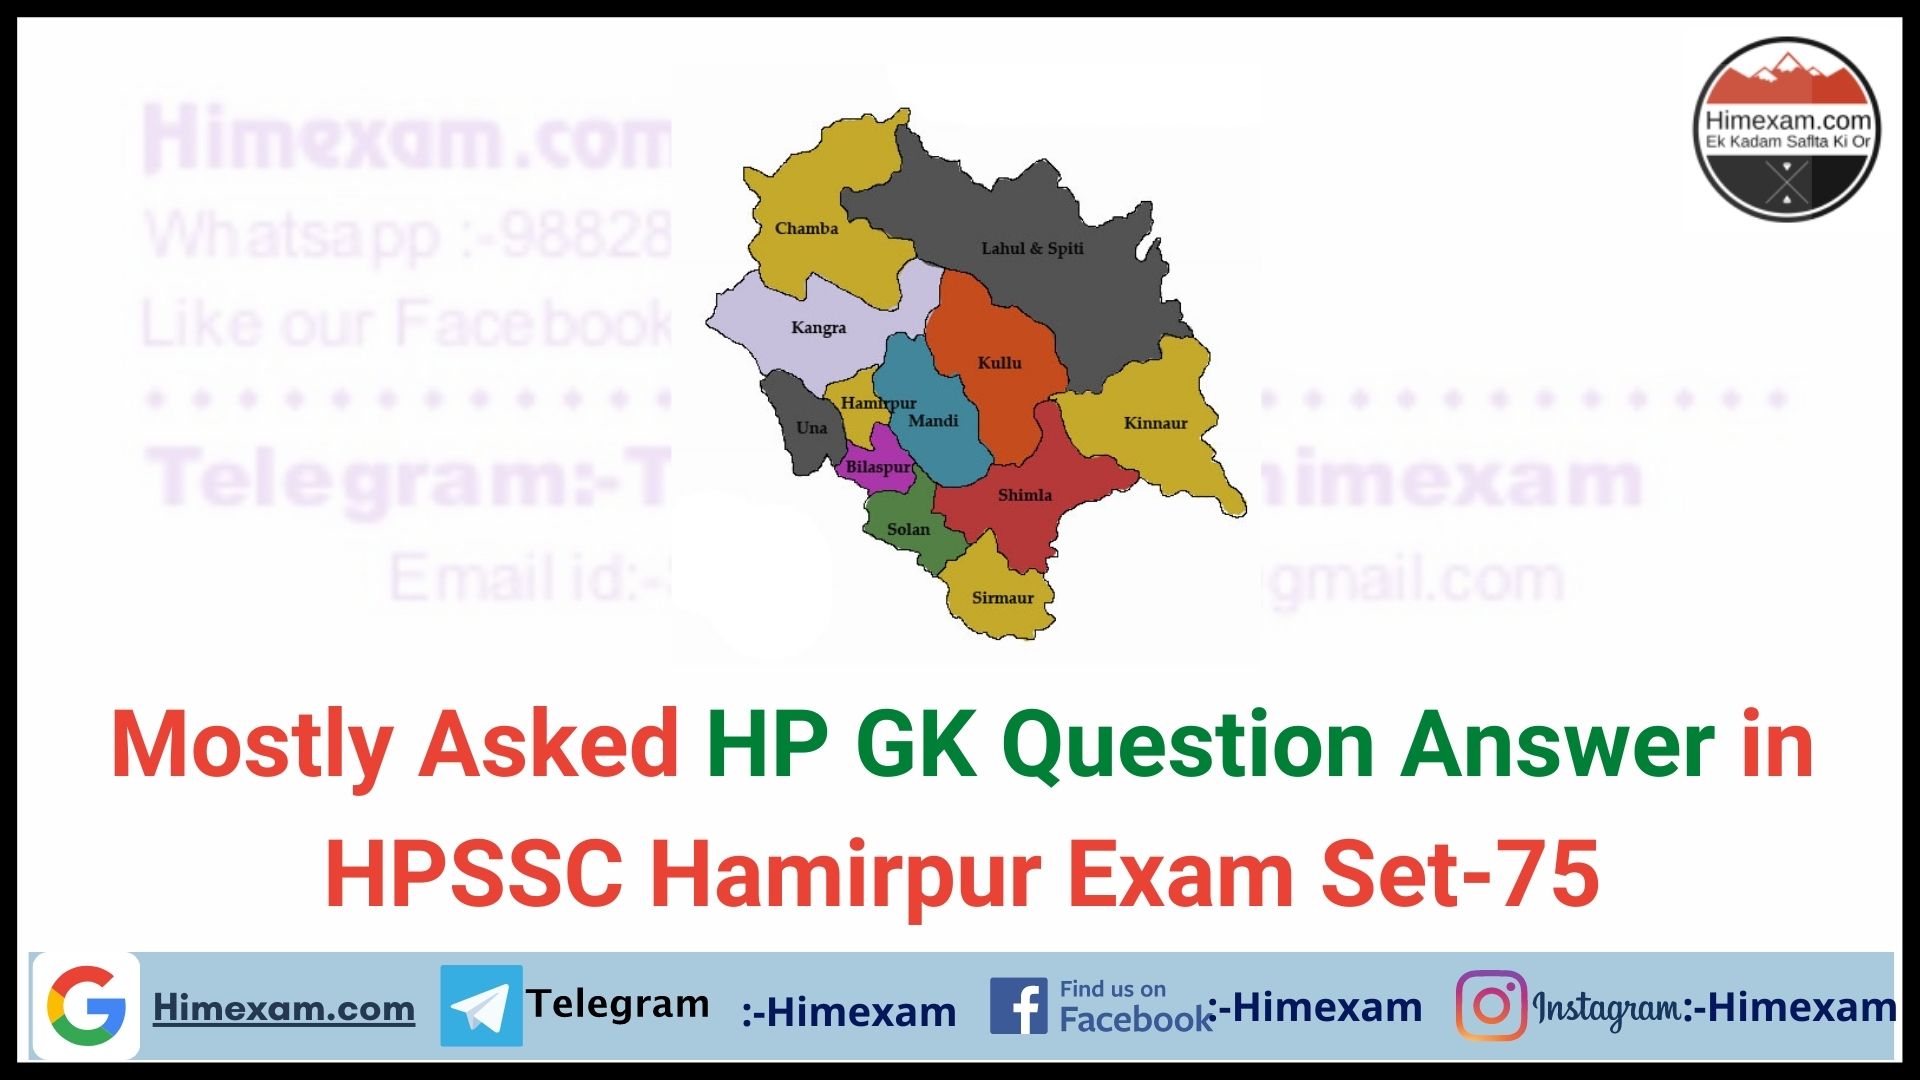 Mostly Asked HP GK Question Answer in HPSSC Hamirpur Exam Set-75